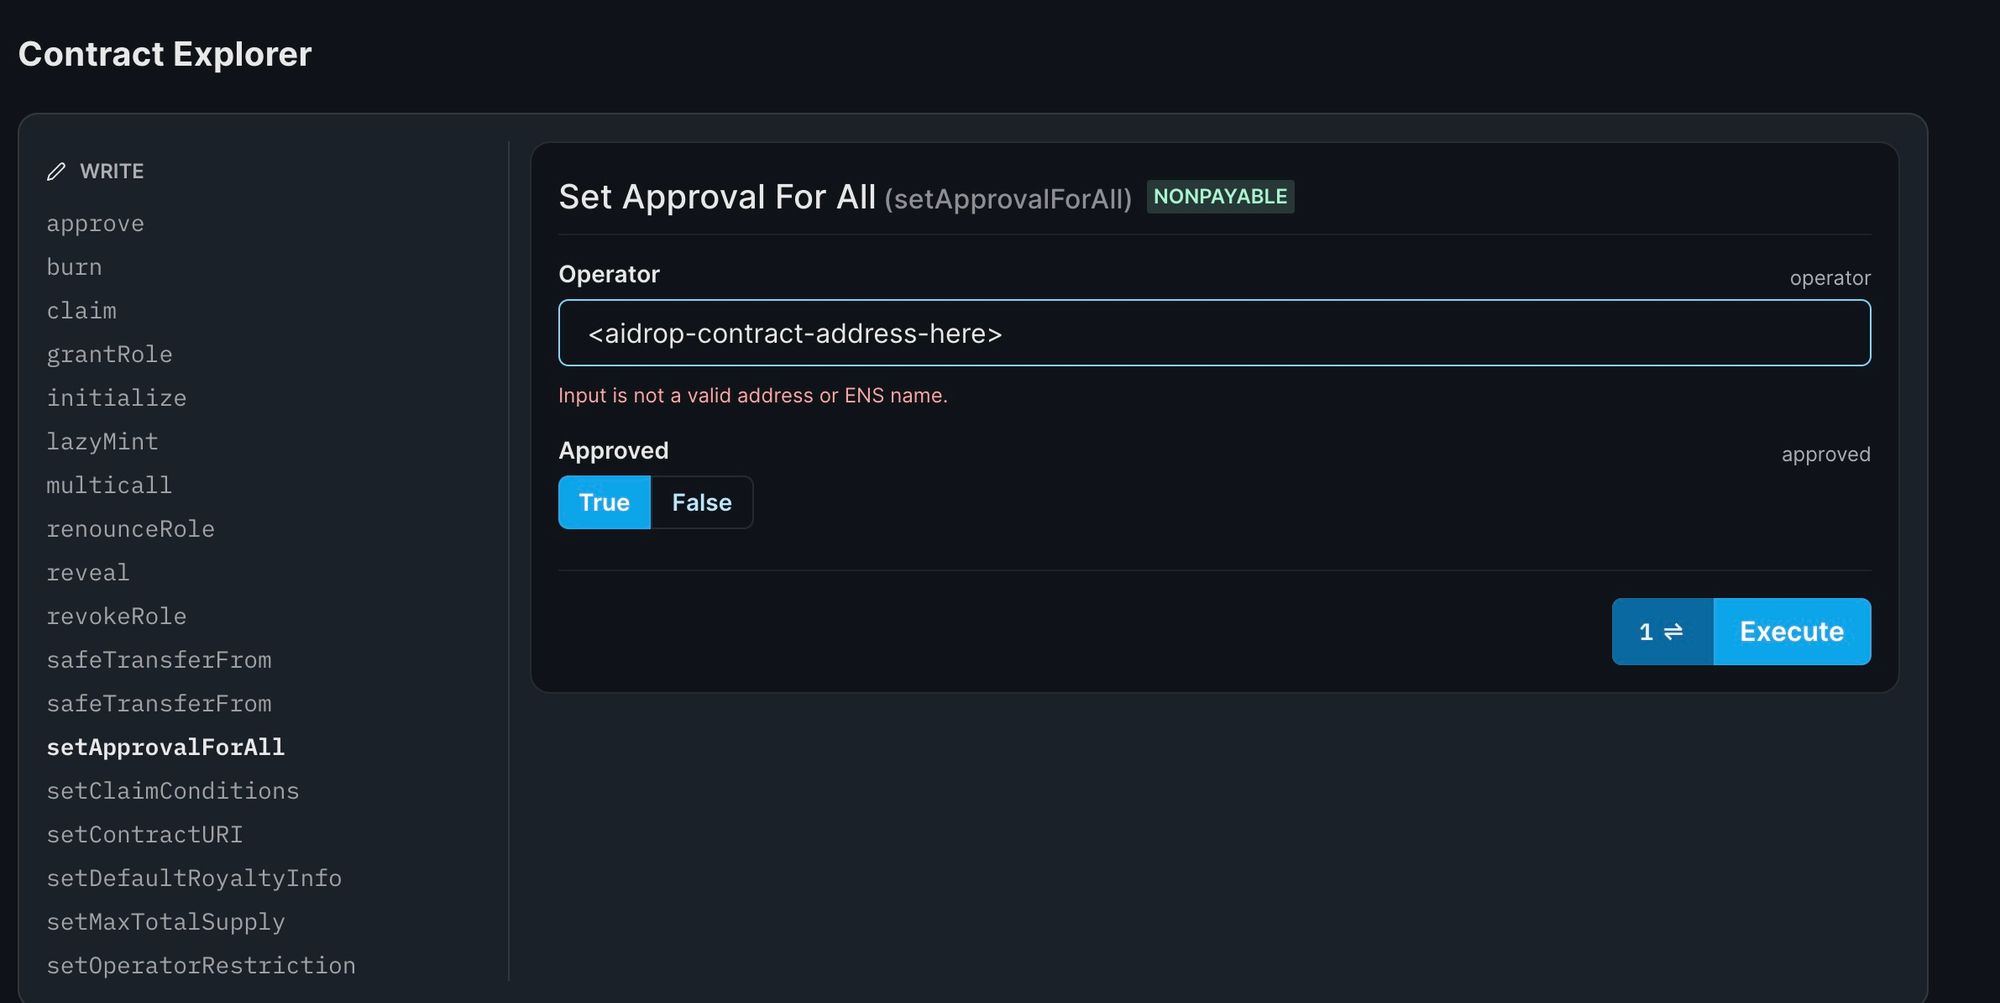 Approve the airdrop contract